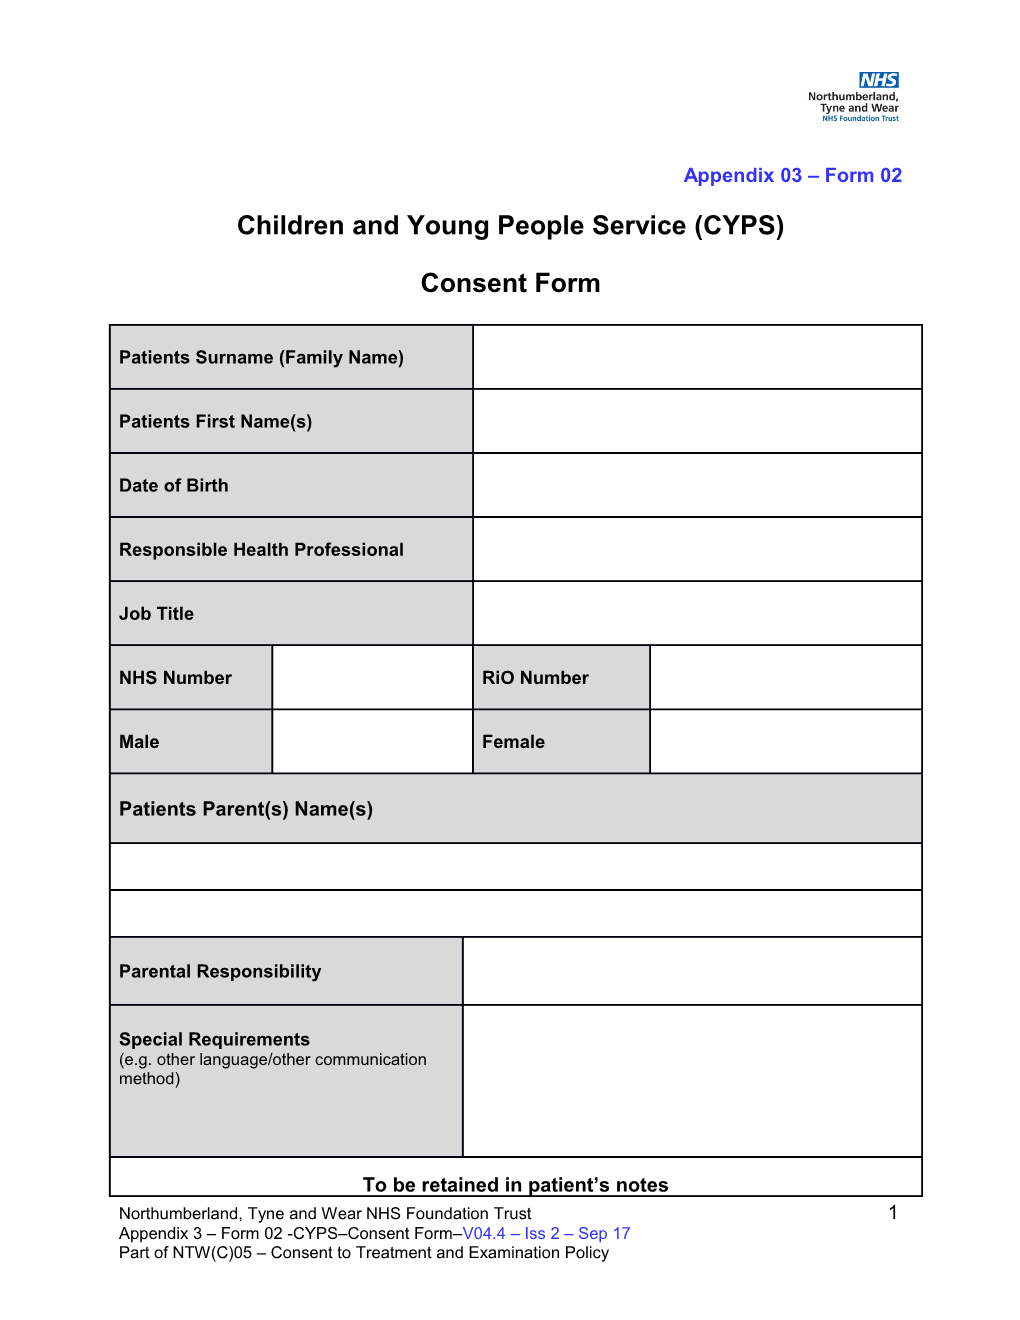 Children and Young People Service (CYPS)